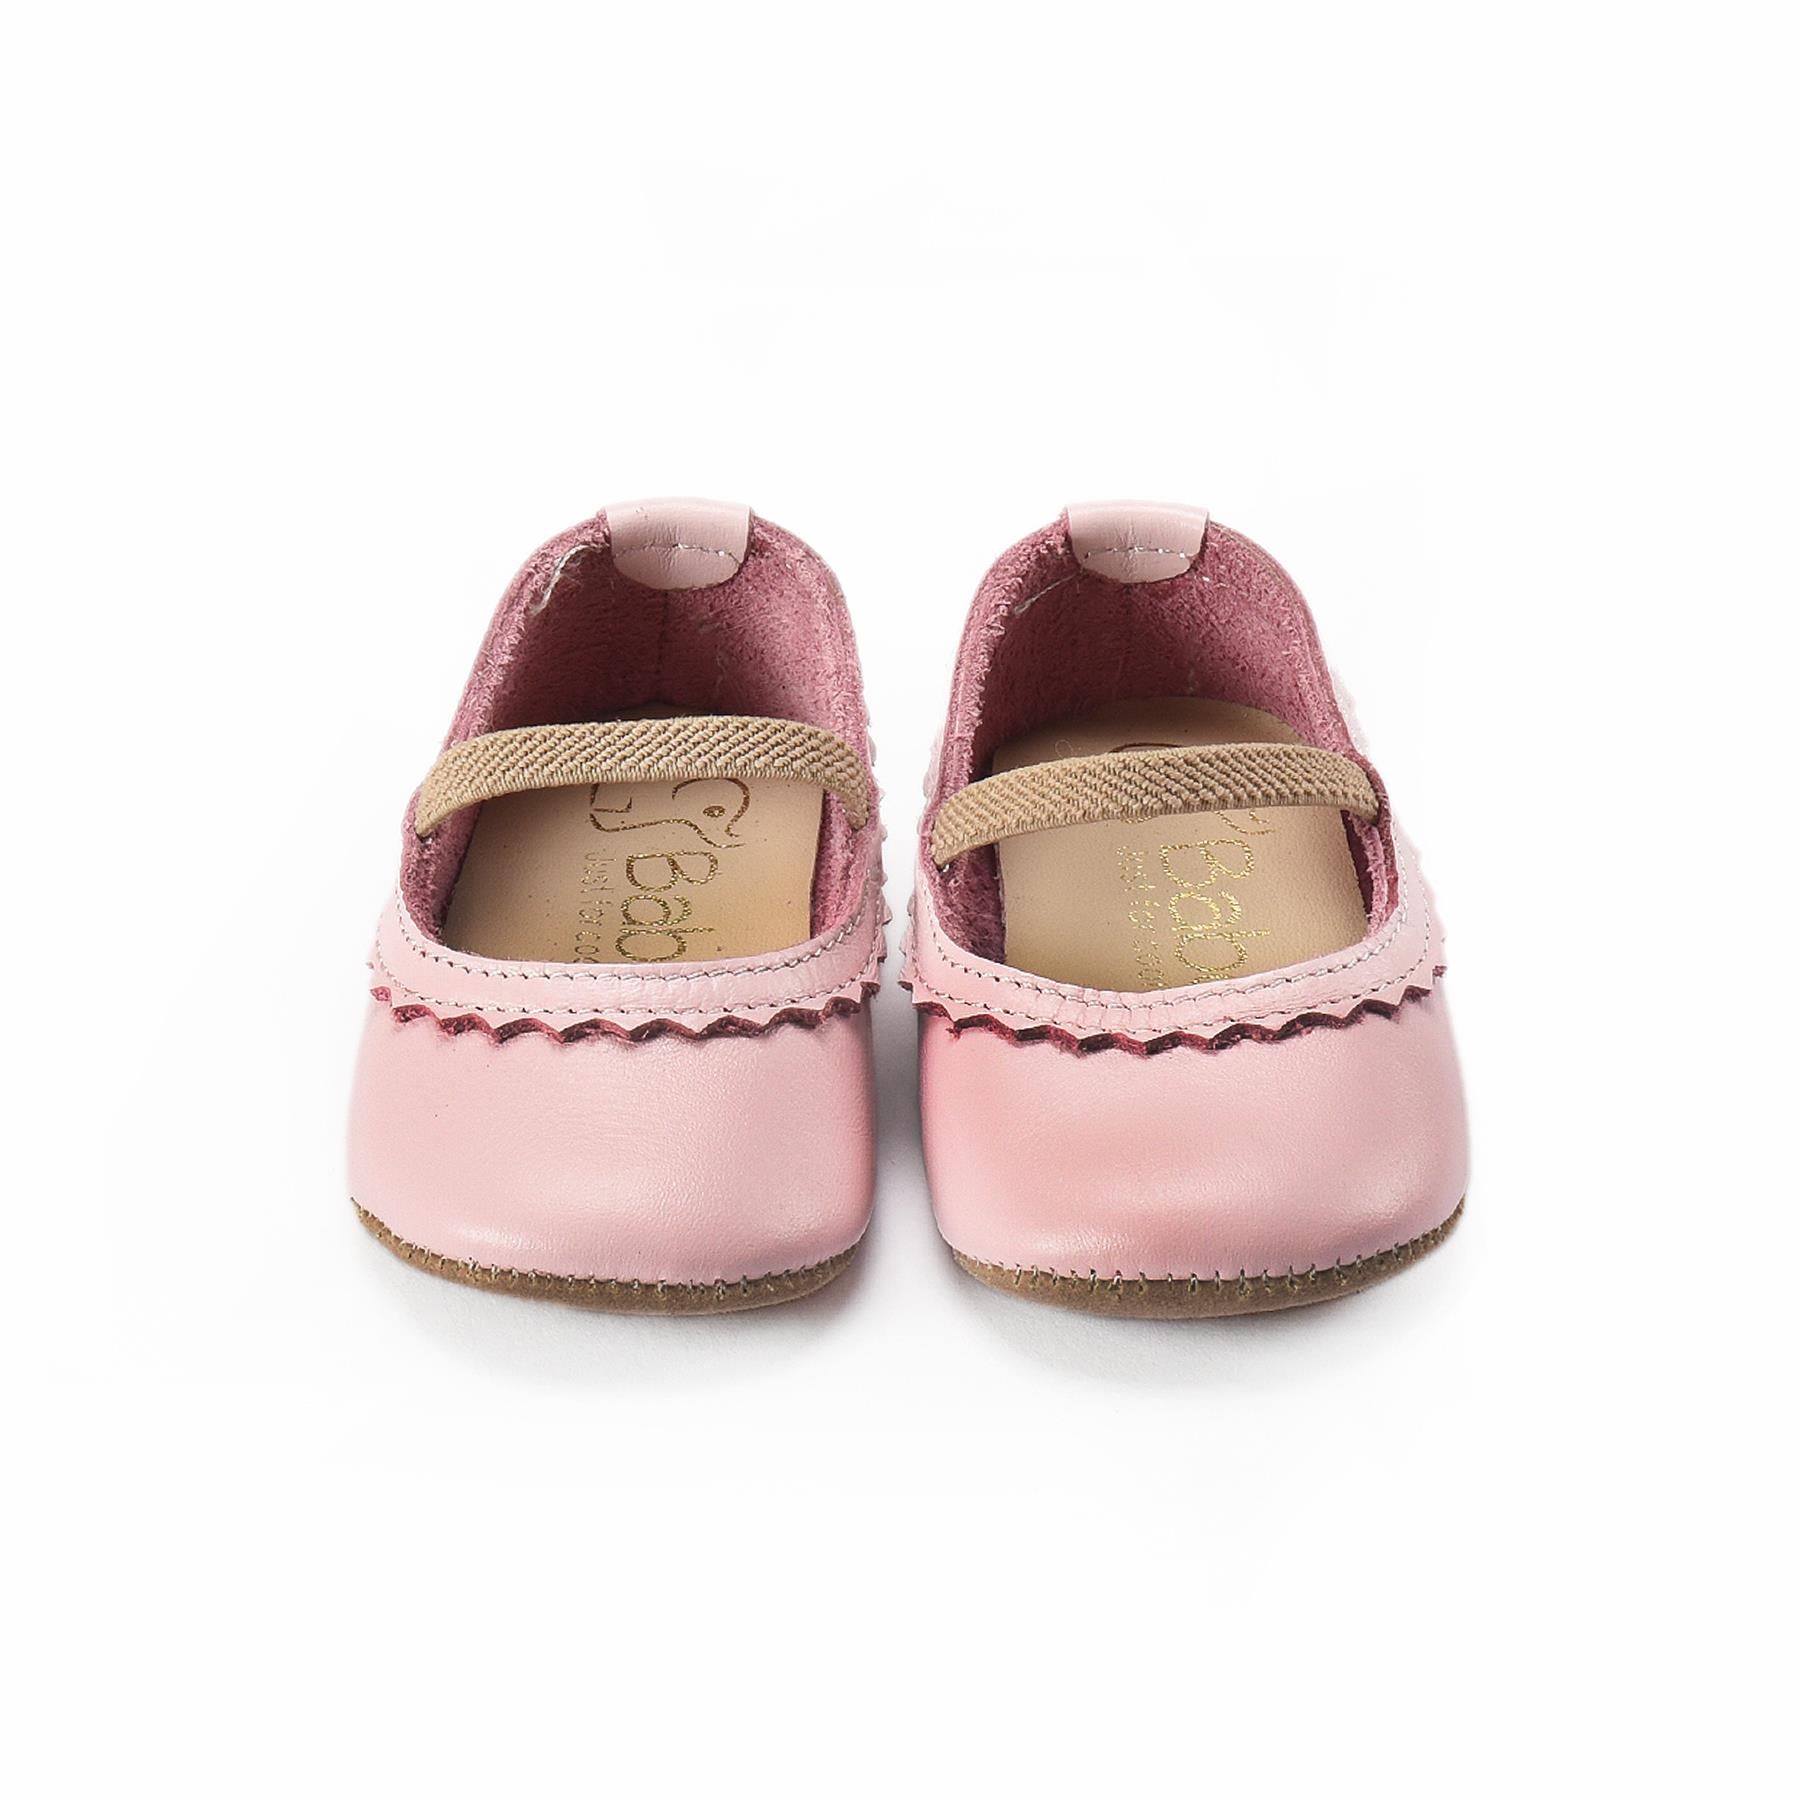 Leather Baby Booties Pink